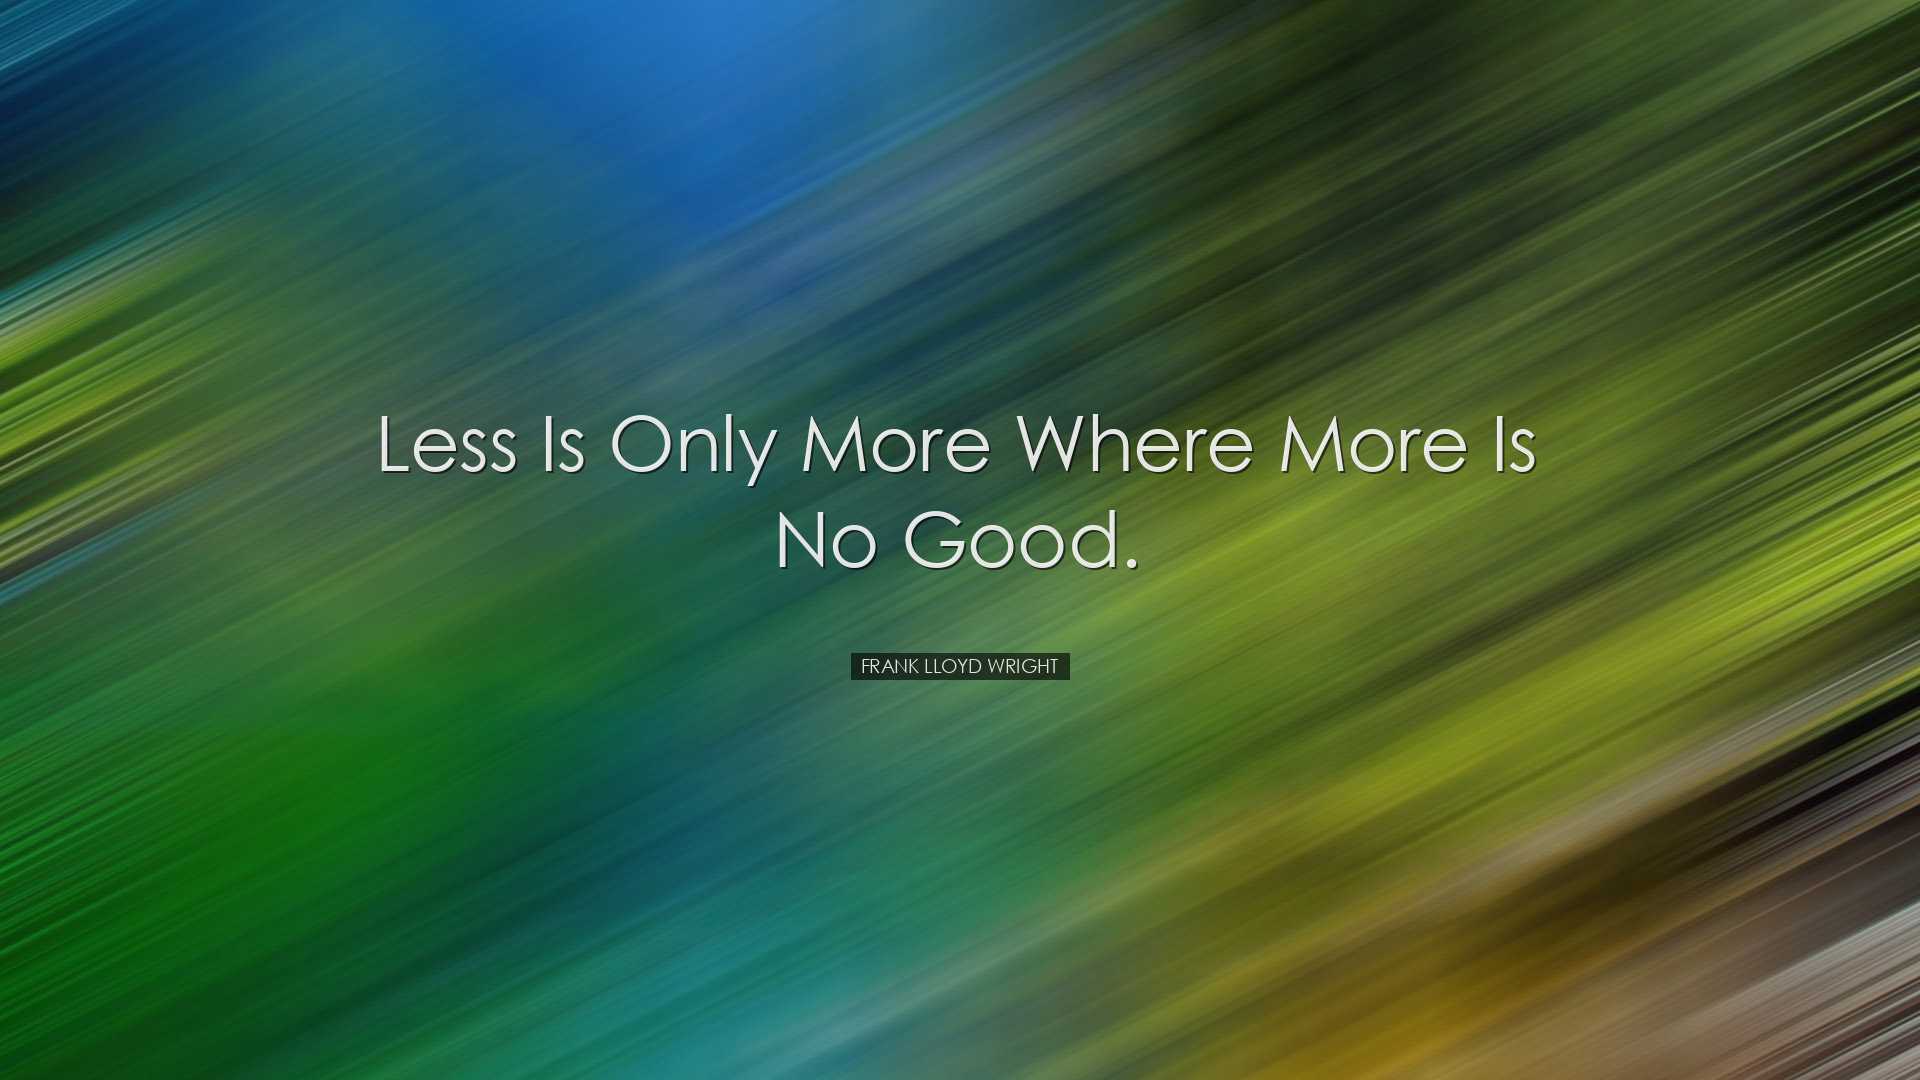 Less is only more where more is no good. - Frank Lloyd Wright